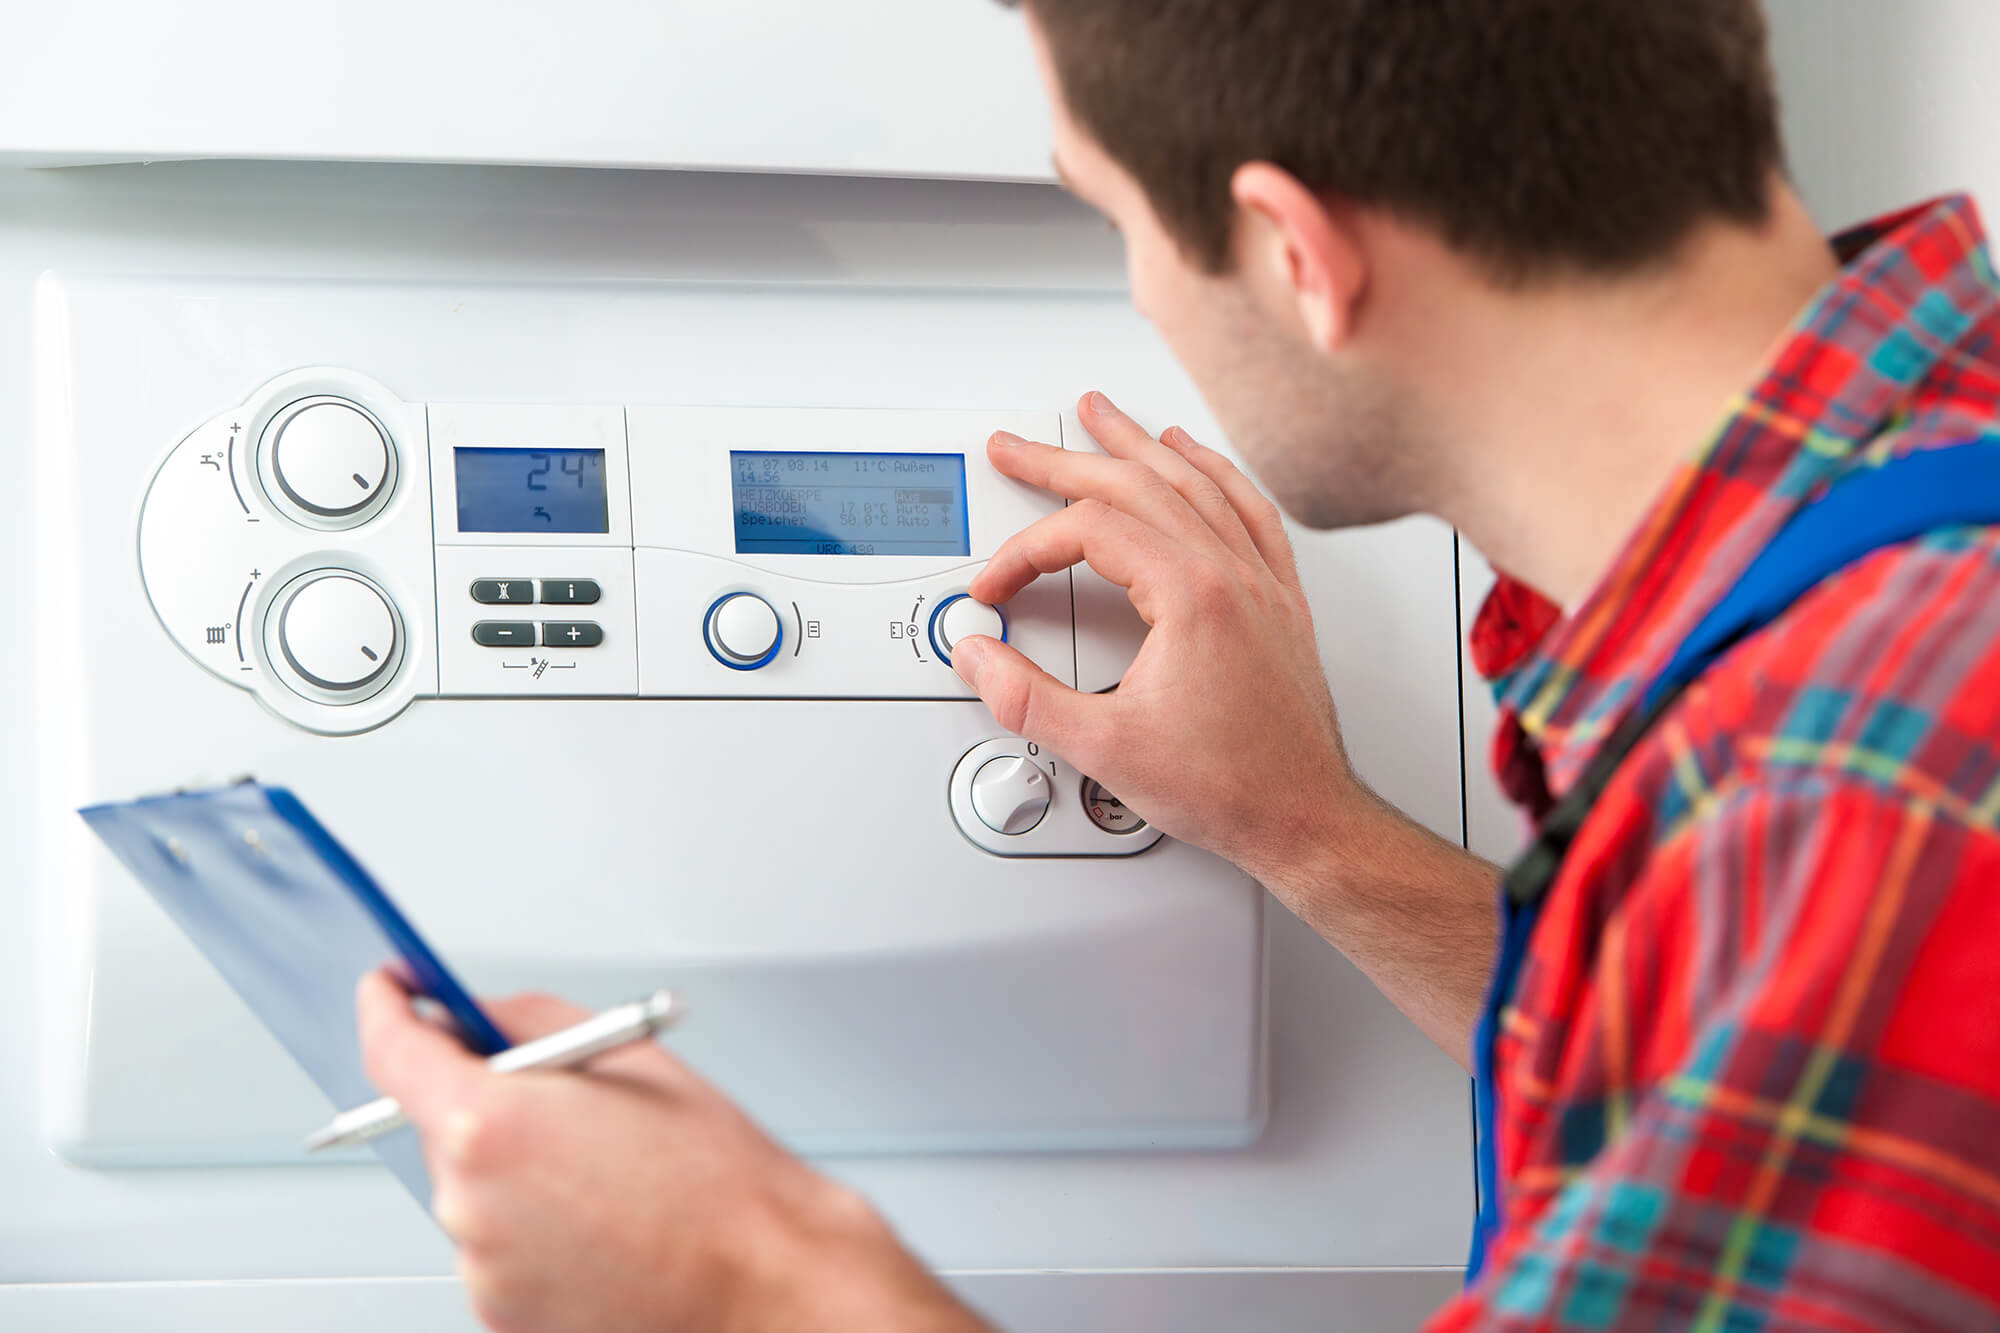 A. Programmable Thermostats: